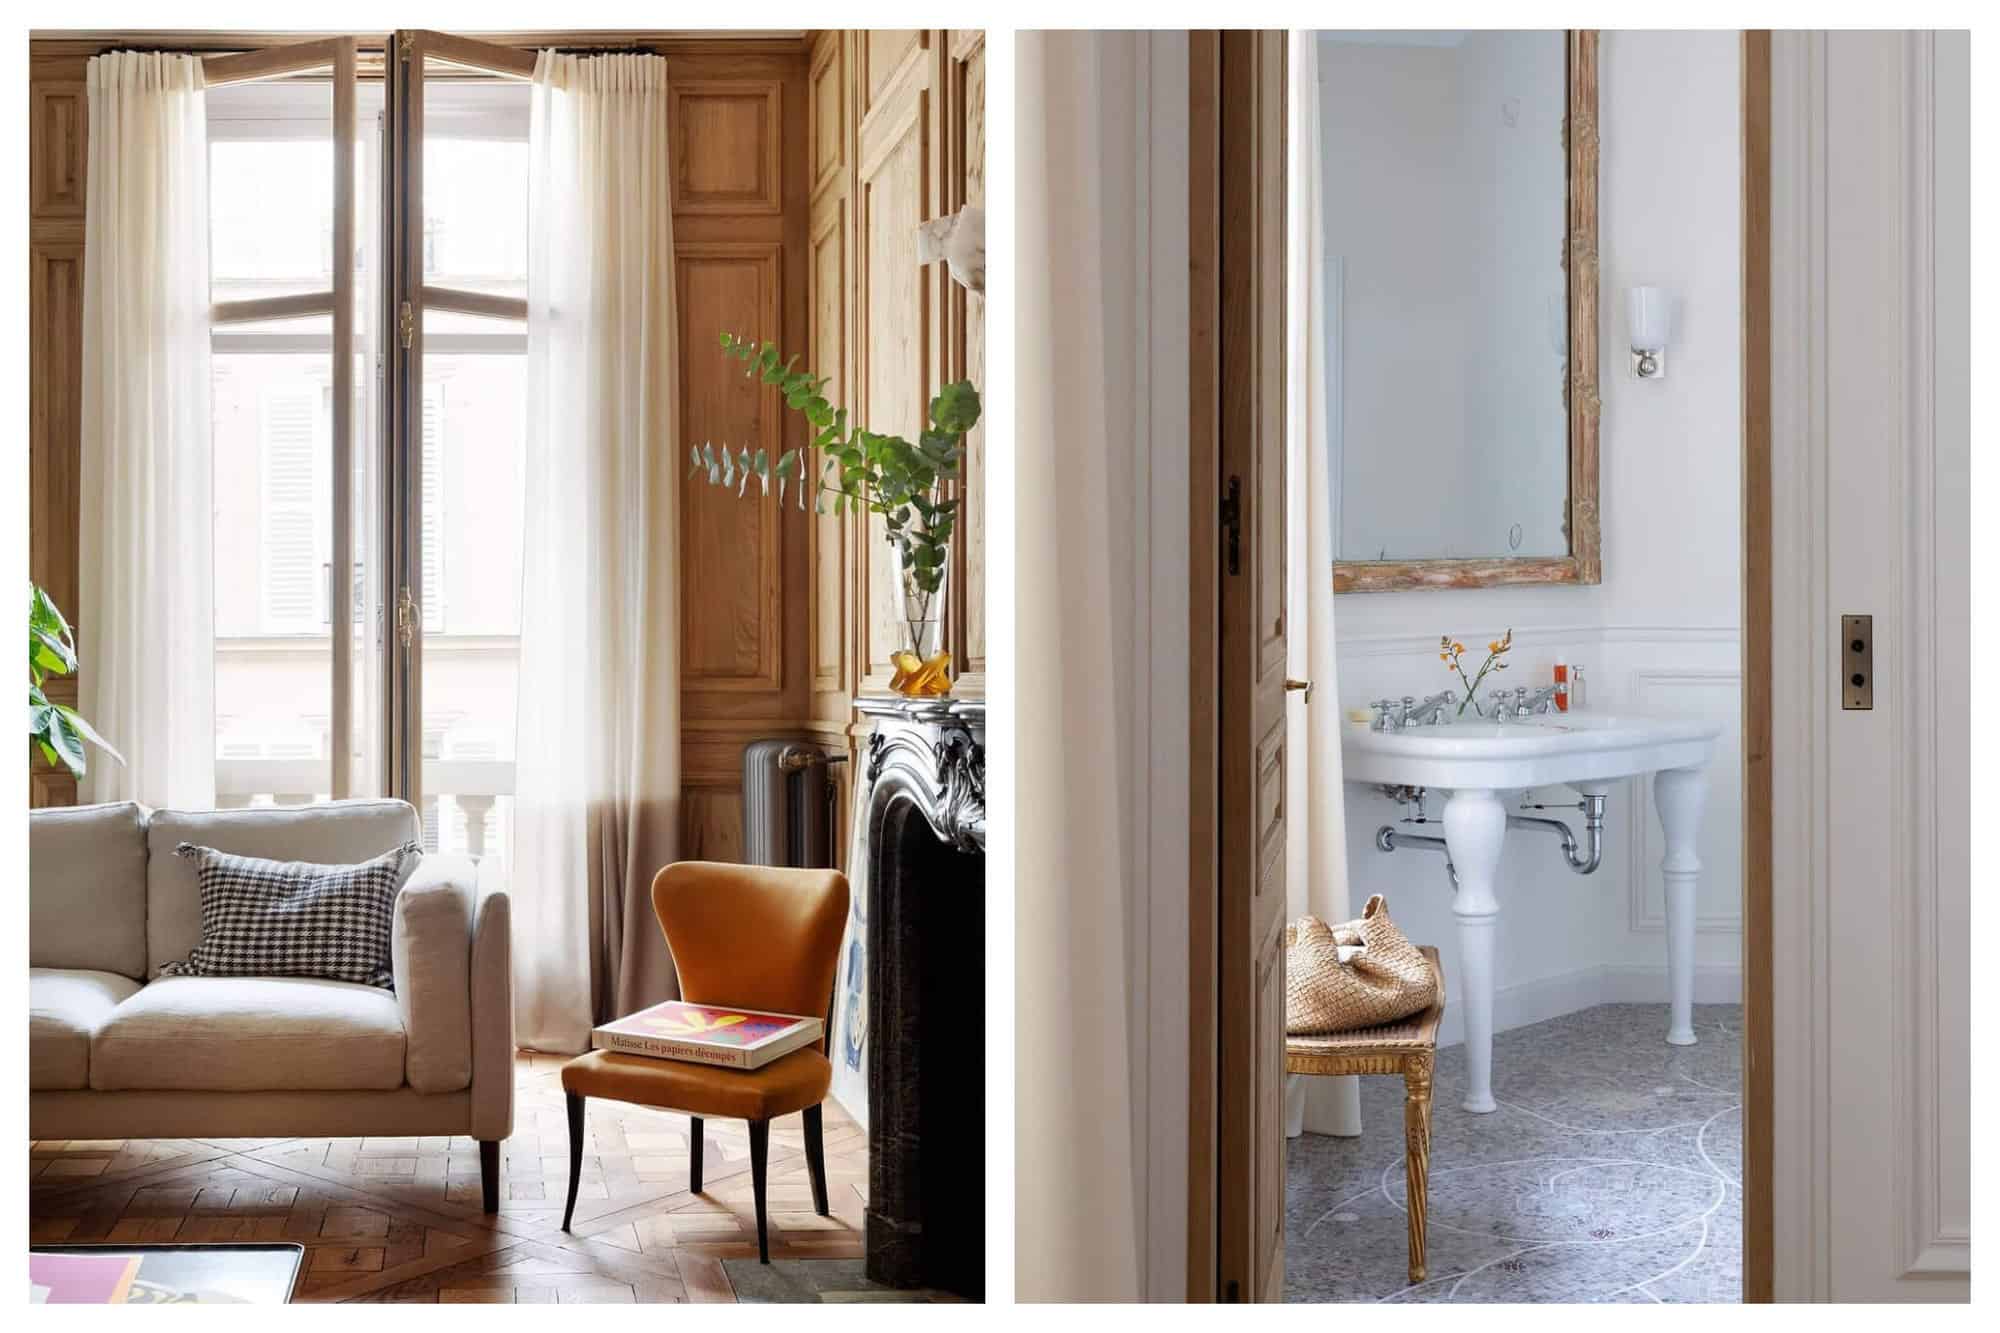 Left: The interior of a Parisian apartment. The walls are wooden, there is a large floor to ceiling window/balcony, with the doors open. The furniture includes a small orange chair, various plants, and a beige couch with a black and white checkered pillow. Right: The photo is taken from the doorway, looking into a bathroom with a large gold mirror above a large sink.